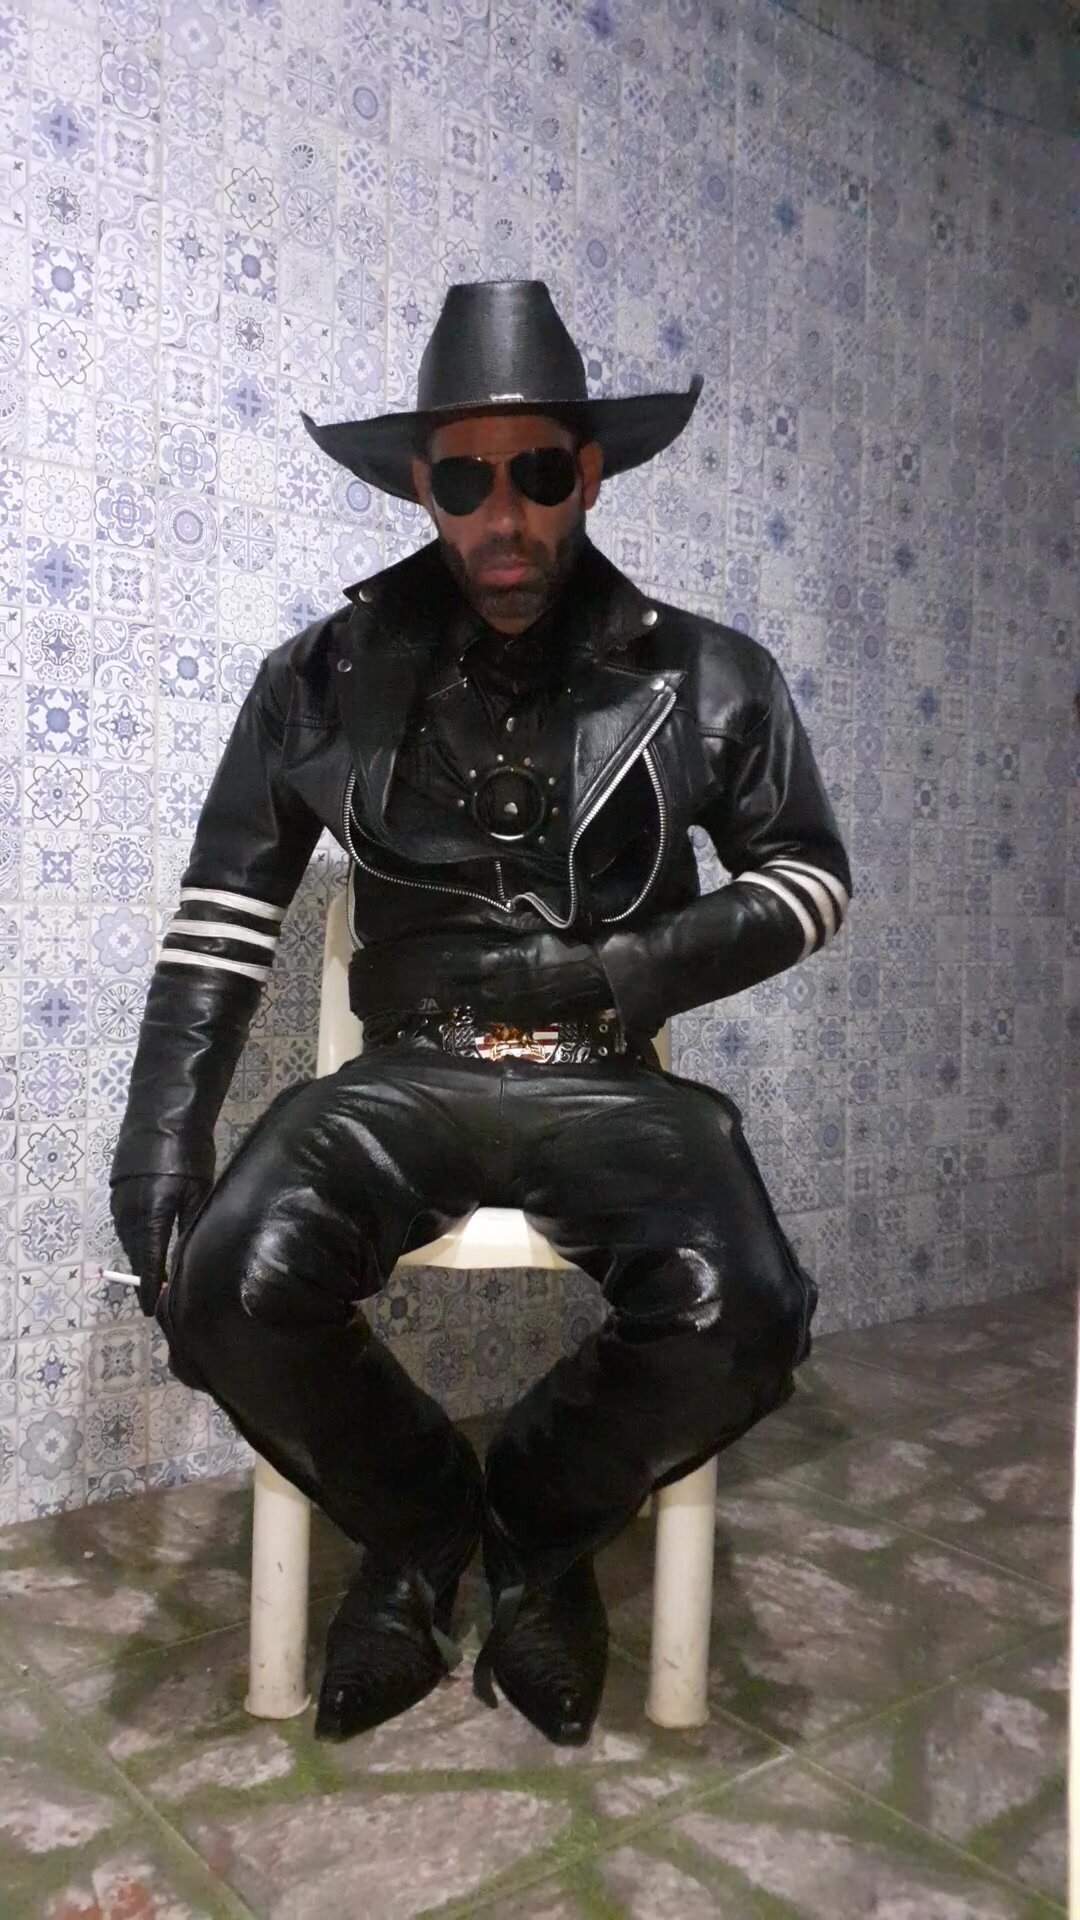 Cowboy with several layers of leather, smoking marlboro